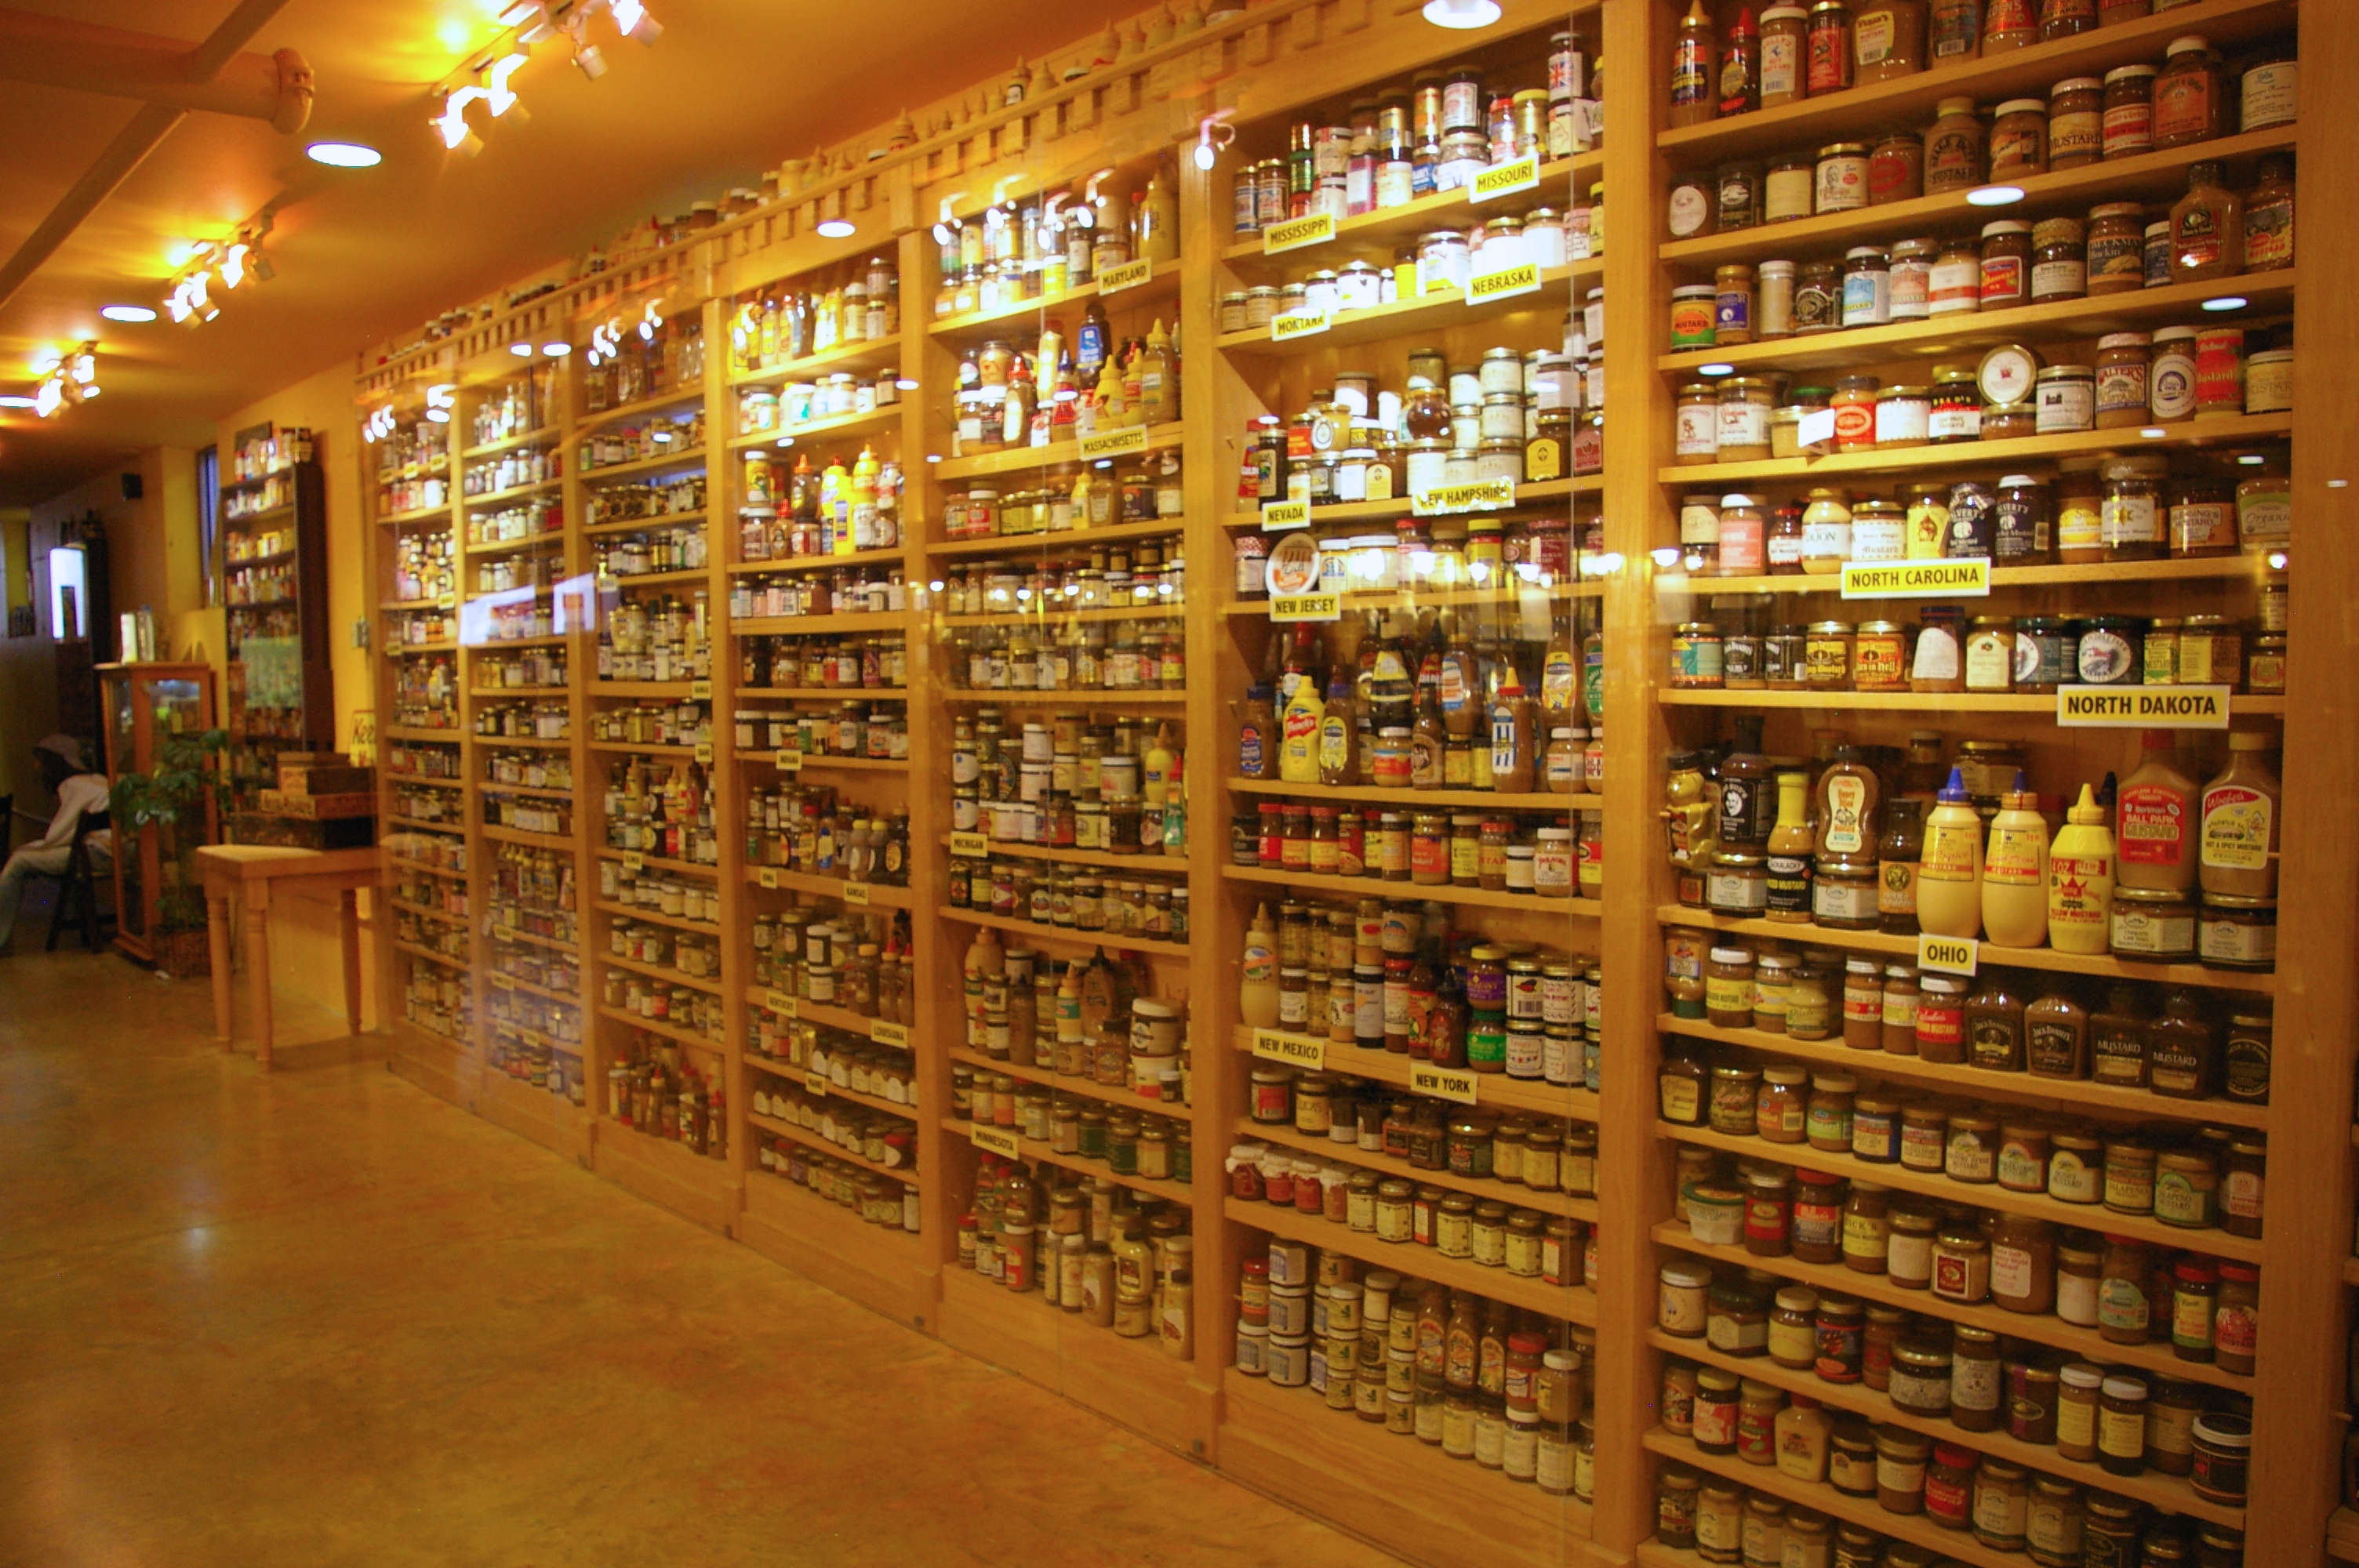 Display of hundreds of different mustards at the National Mustard Museum near Madison, Wisconsin